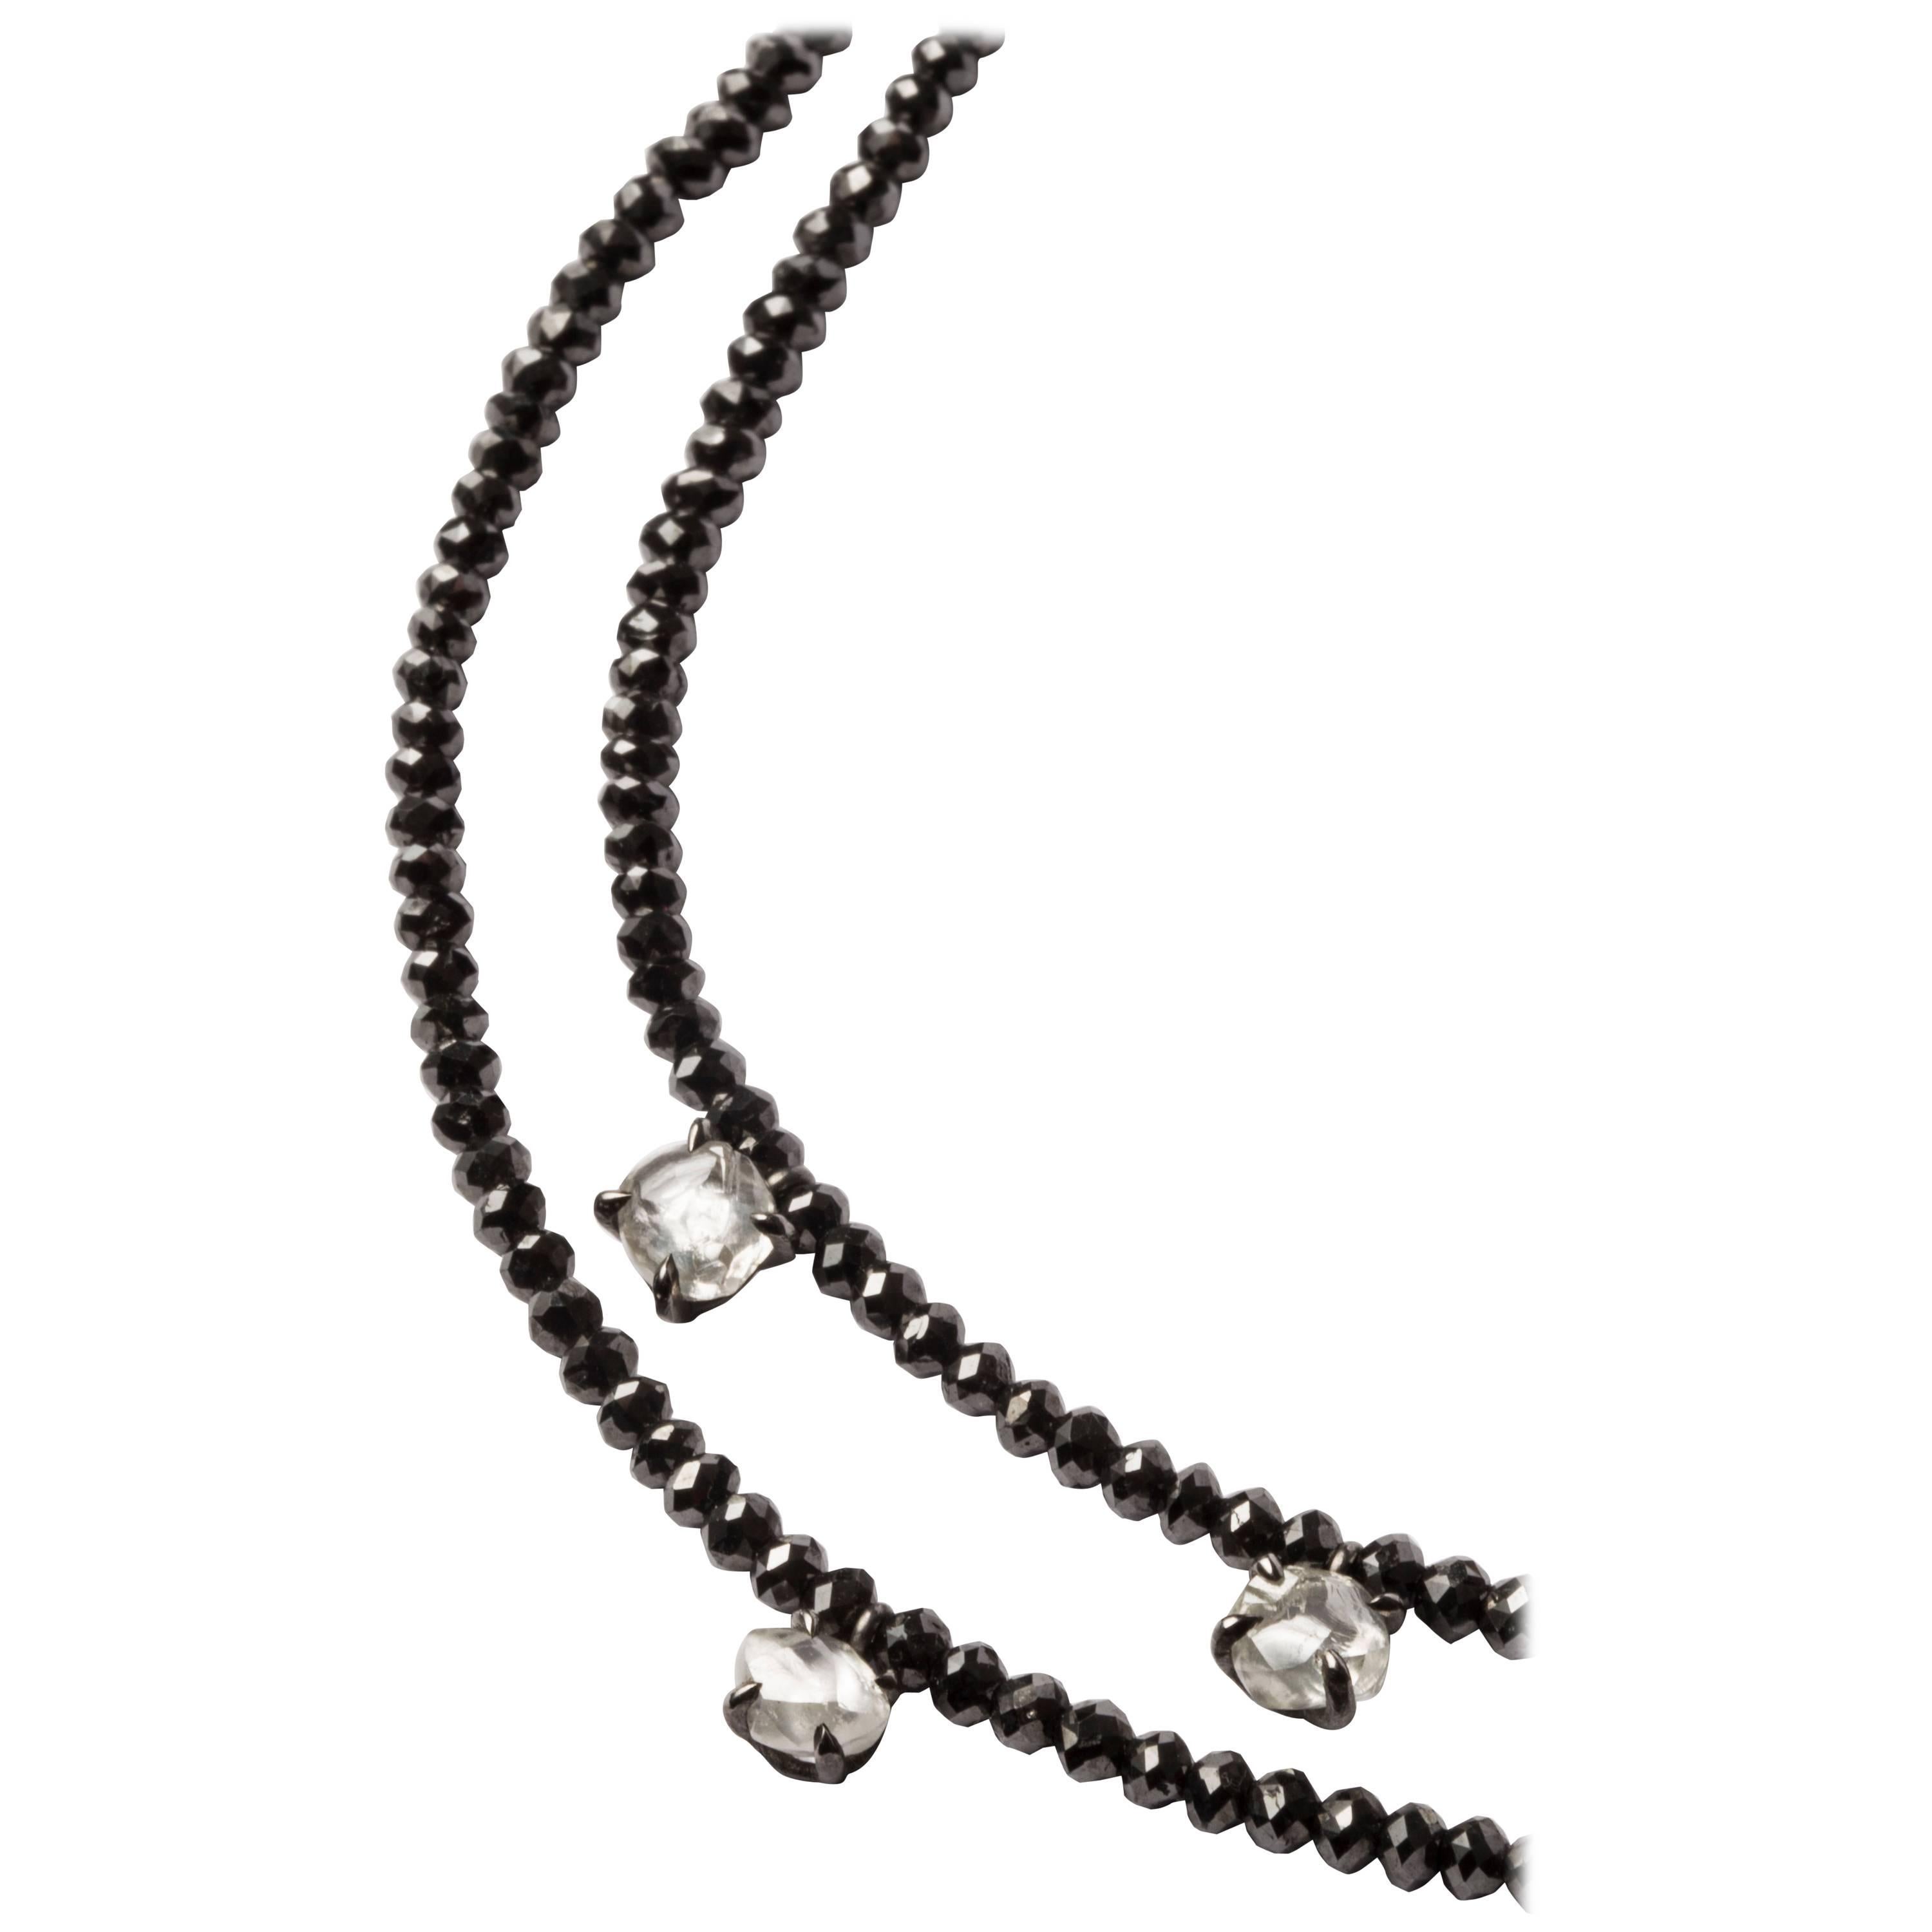 3.39 Carat Rough and 62.27 Carat Black Facetted Diamonds Collier Necklace For Sale